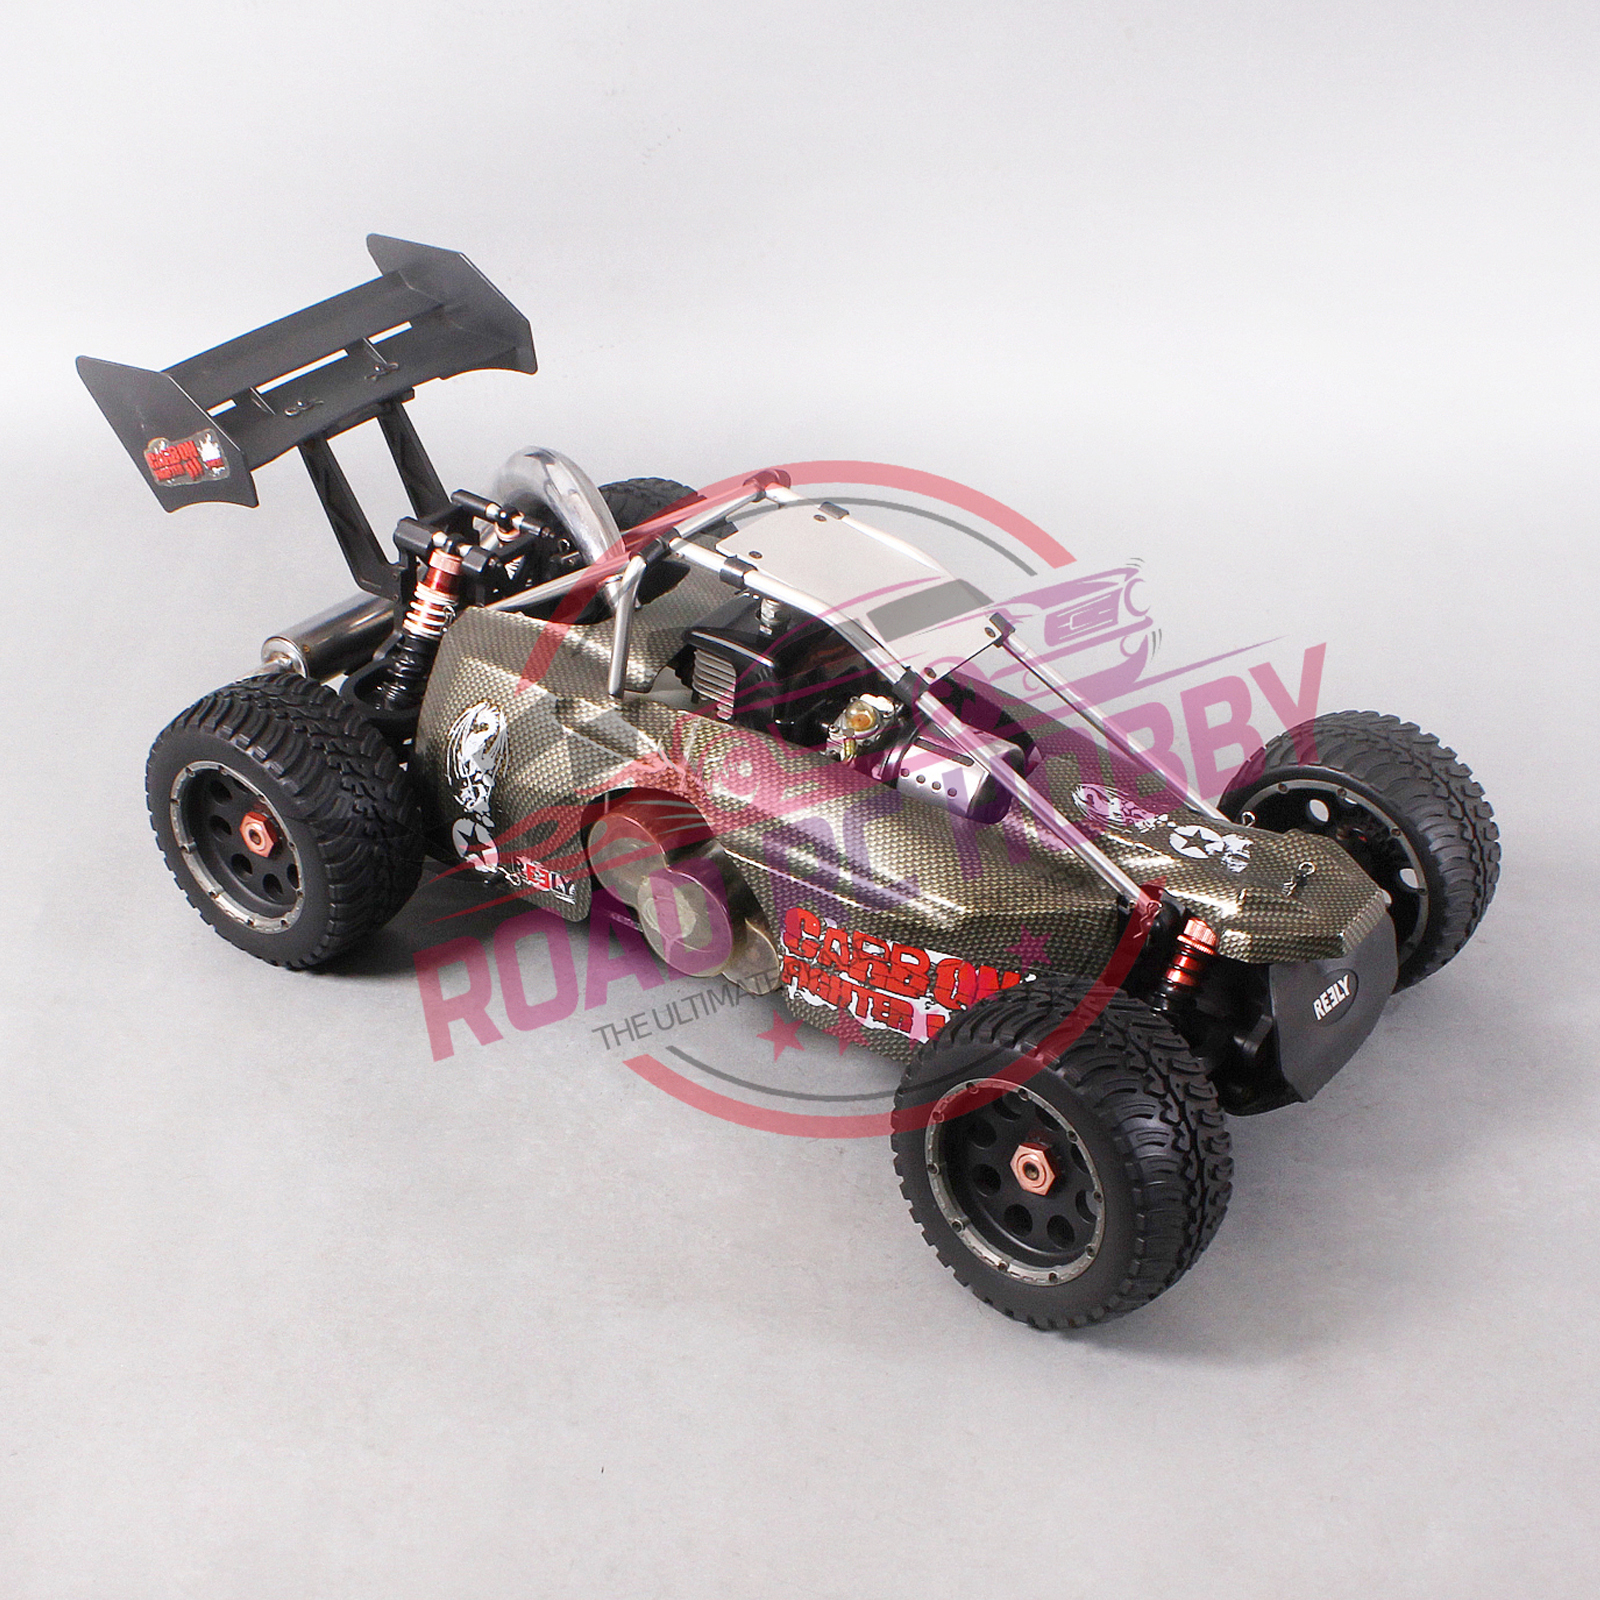 Reely Carbon Fighter III 1:6 RC Petrol Buggy RWD – Road RC Hobby – Huge  collection of toys RC Cars Trucks Rock crawlers & Boats In Karachi Pakistan